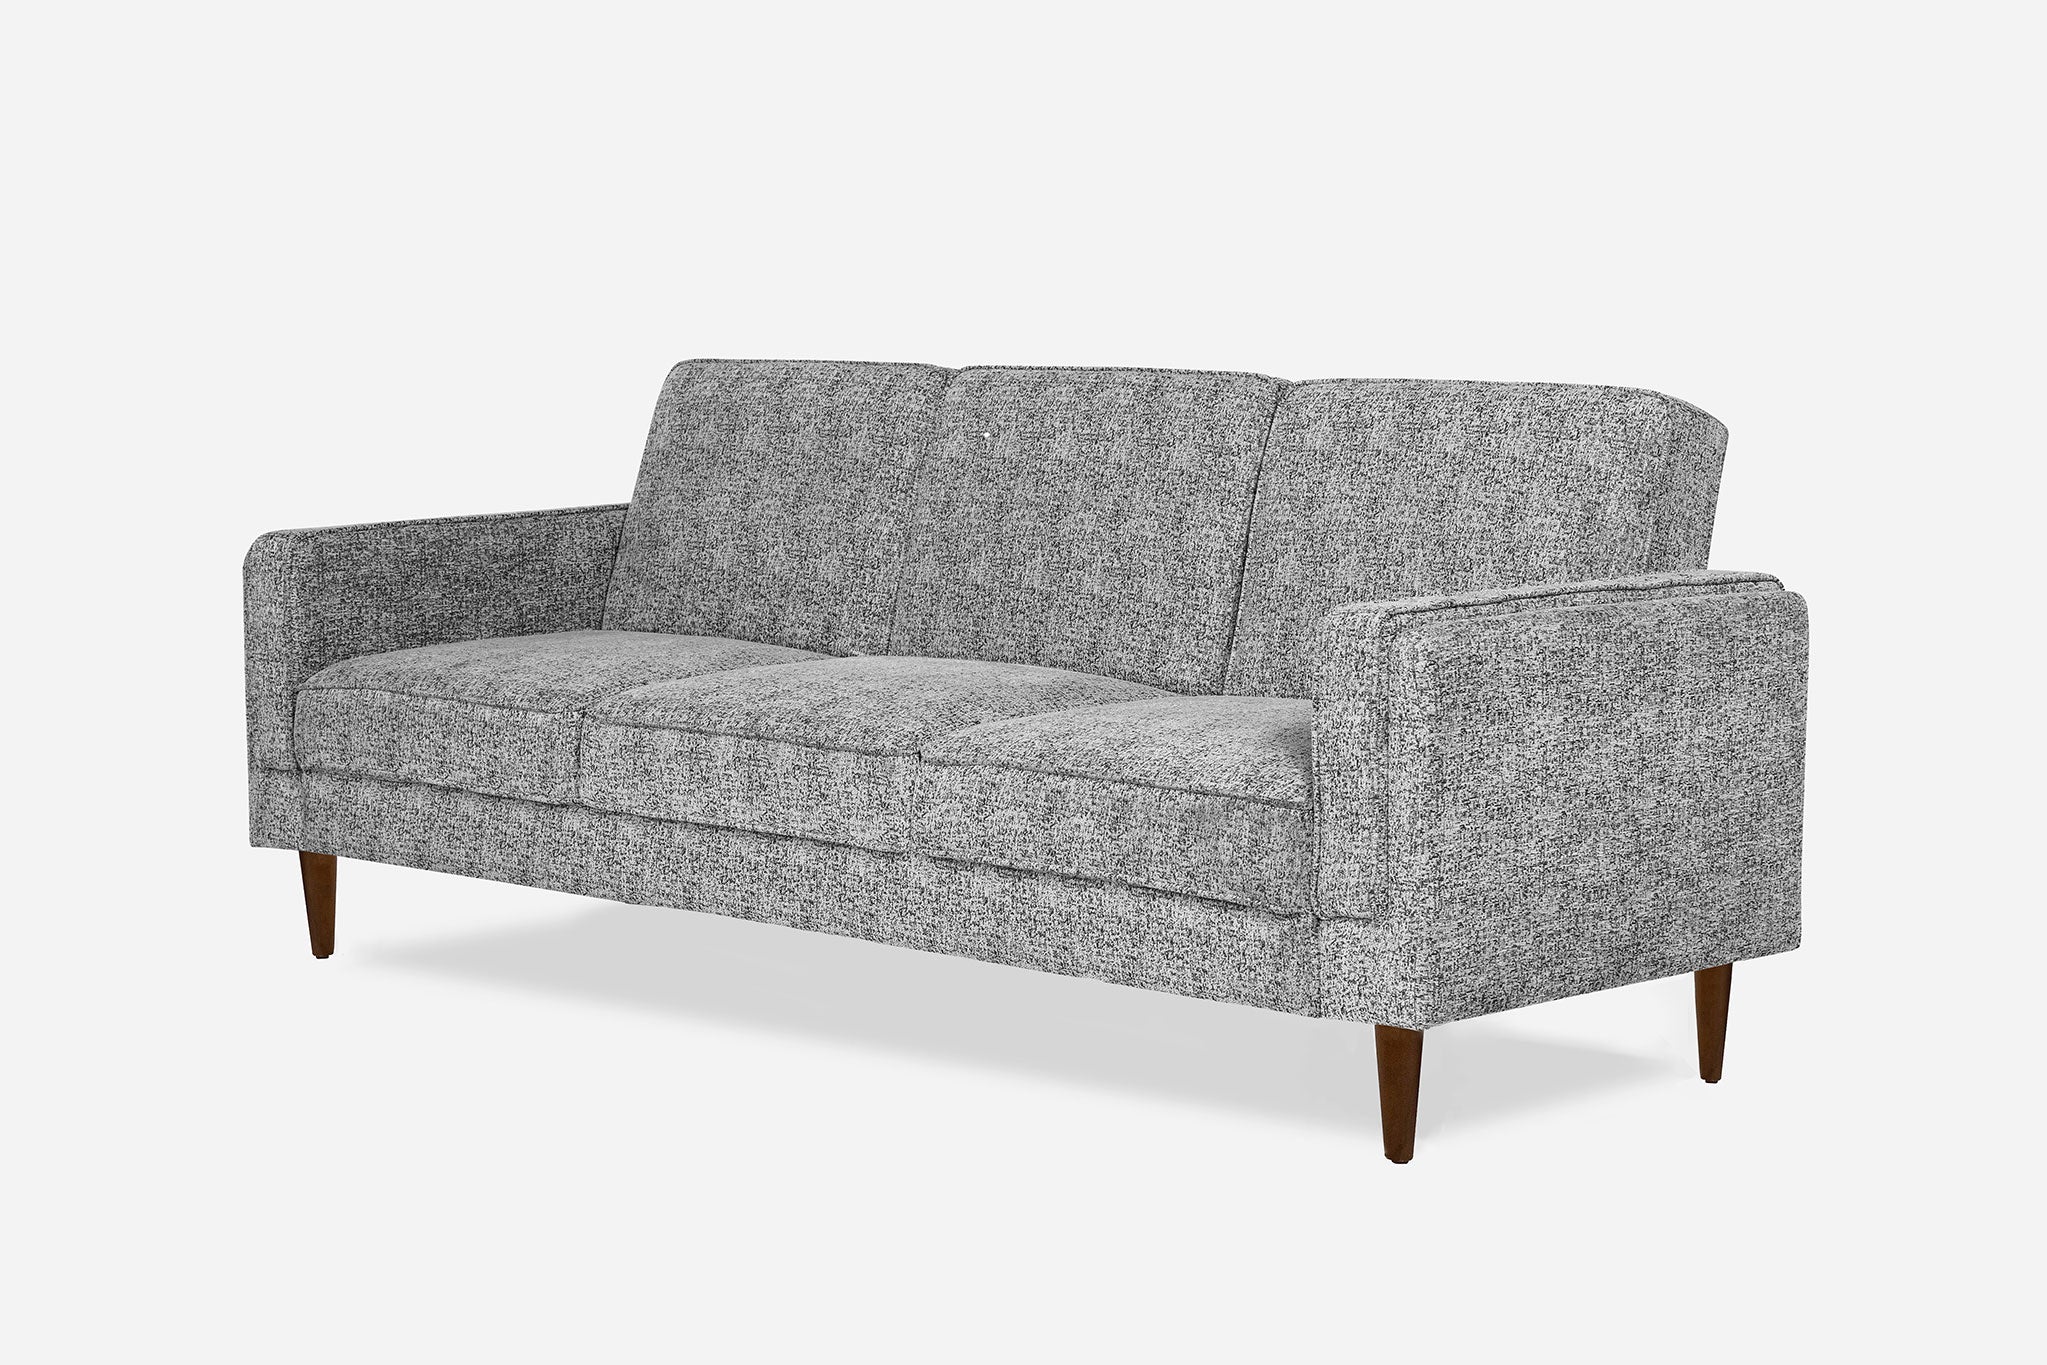 side view of the albany sleeper sofa in grey with walnut legs